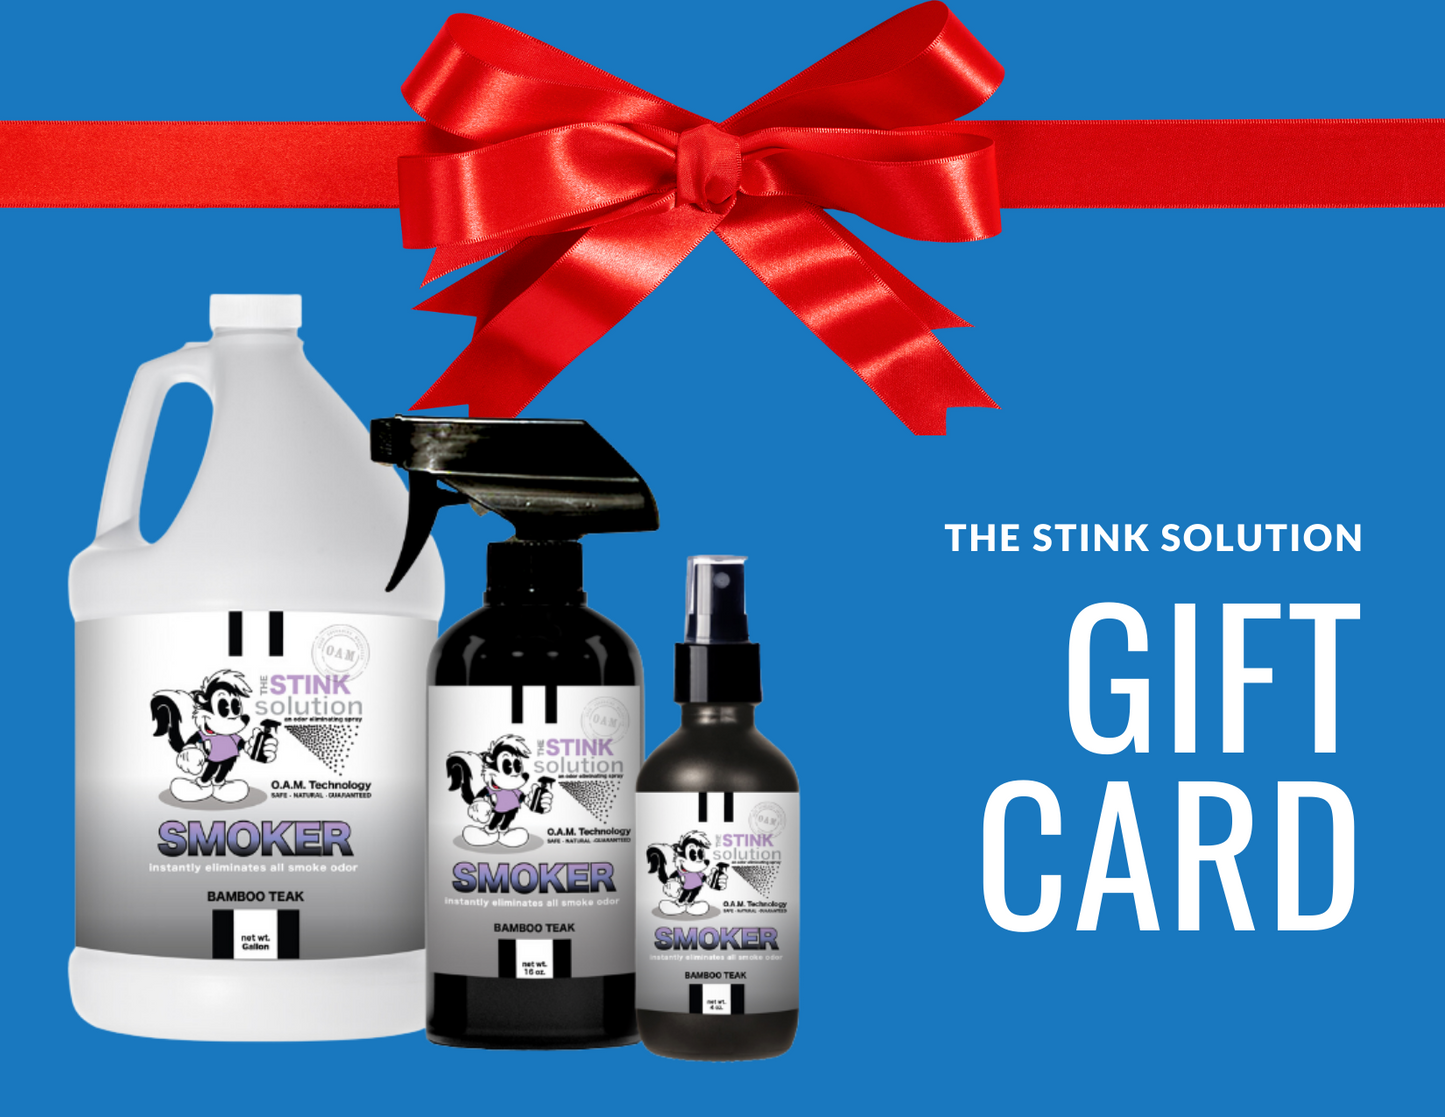 The Stink Solution Gift Card